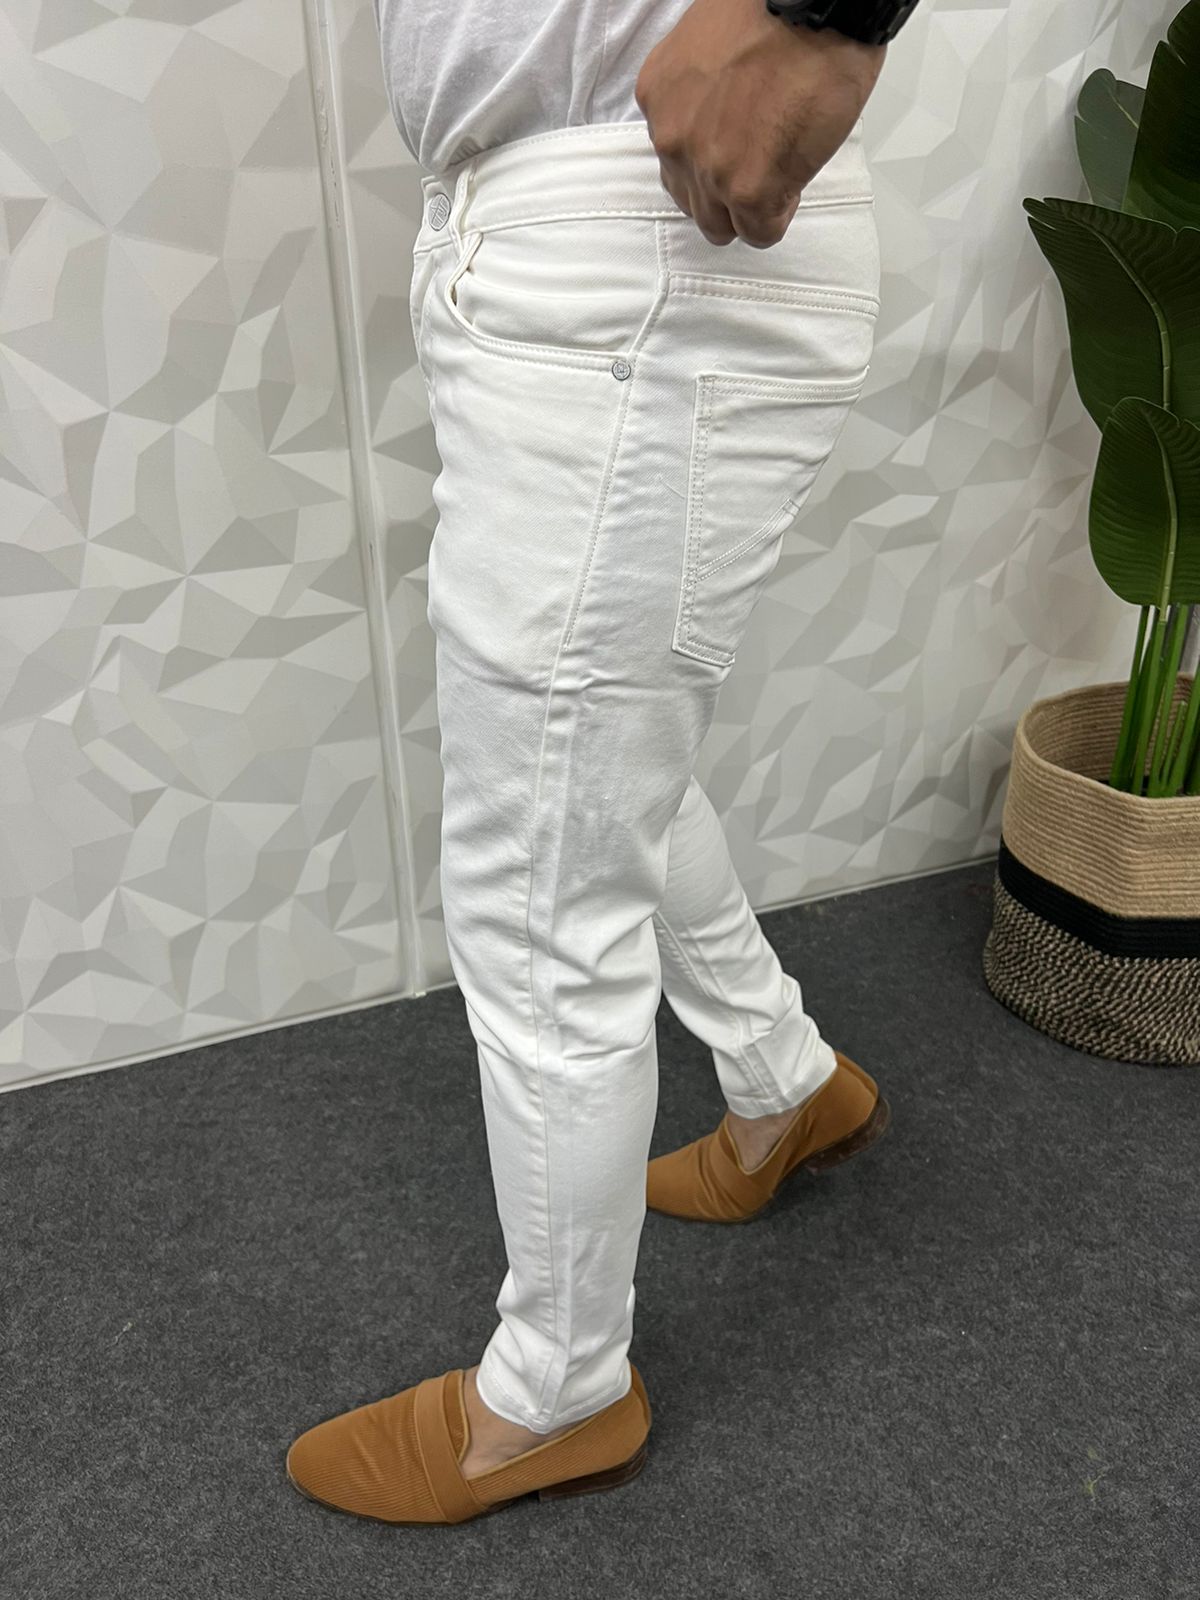 Ankle length white jeans